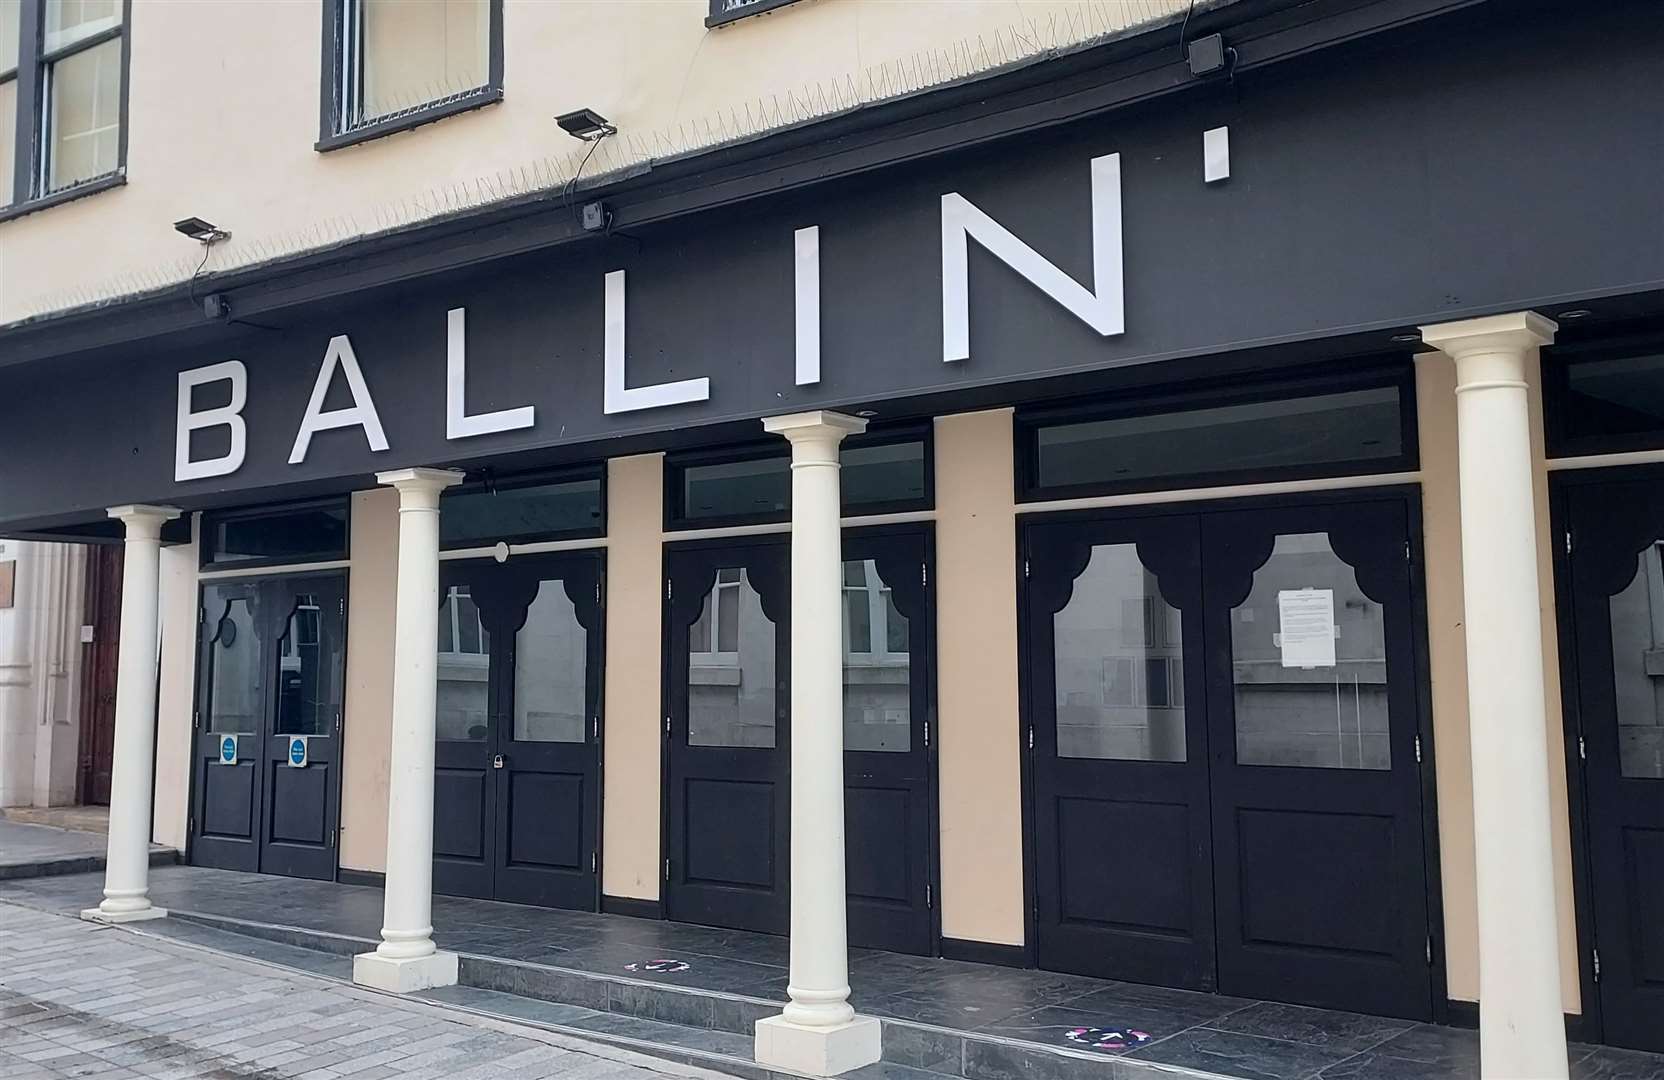 Ballin' Maidstone is a new sports bar which opened in the County Town this year